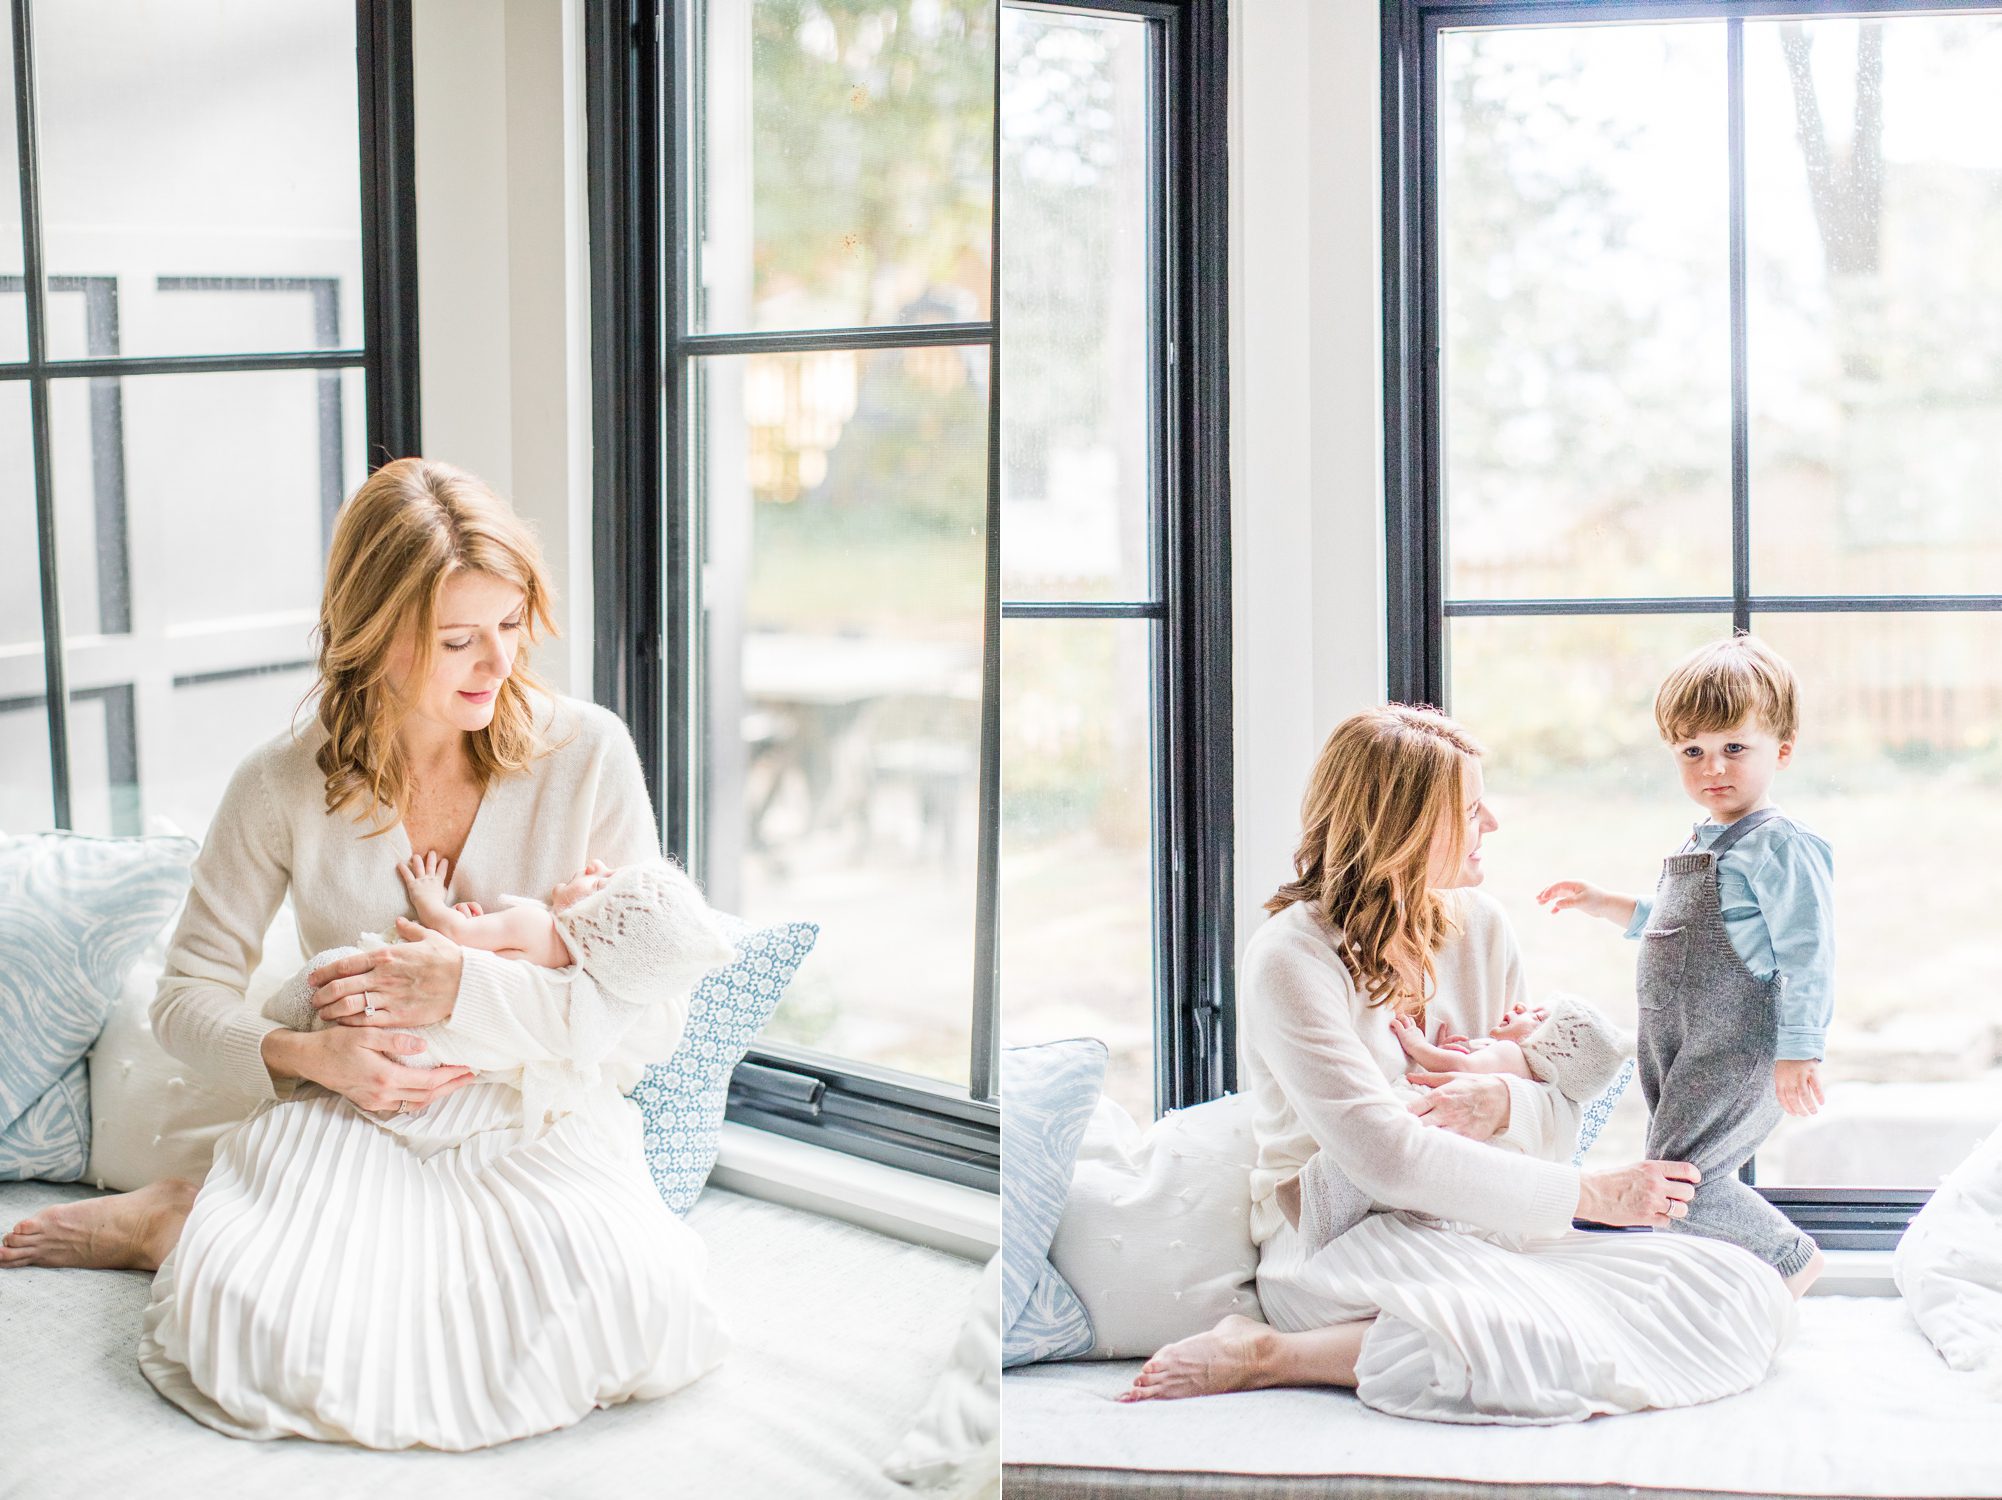 Mom sitting at window seat with baby and toddler during newborn session. Photos by LRG Portraits.